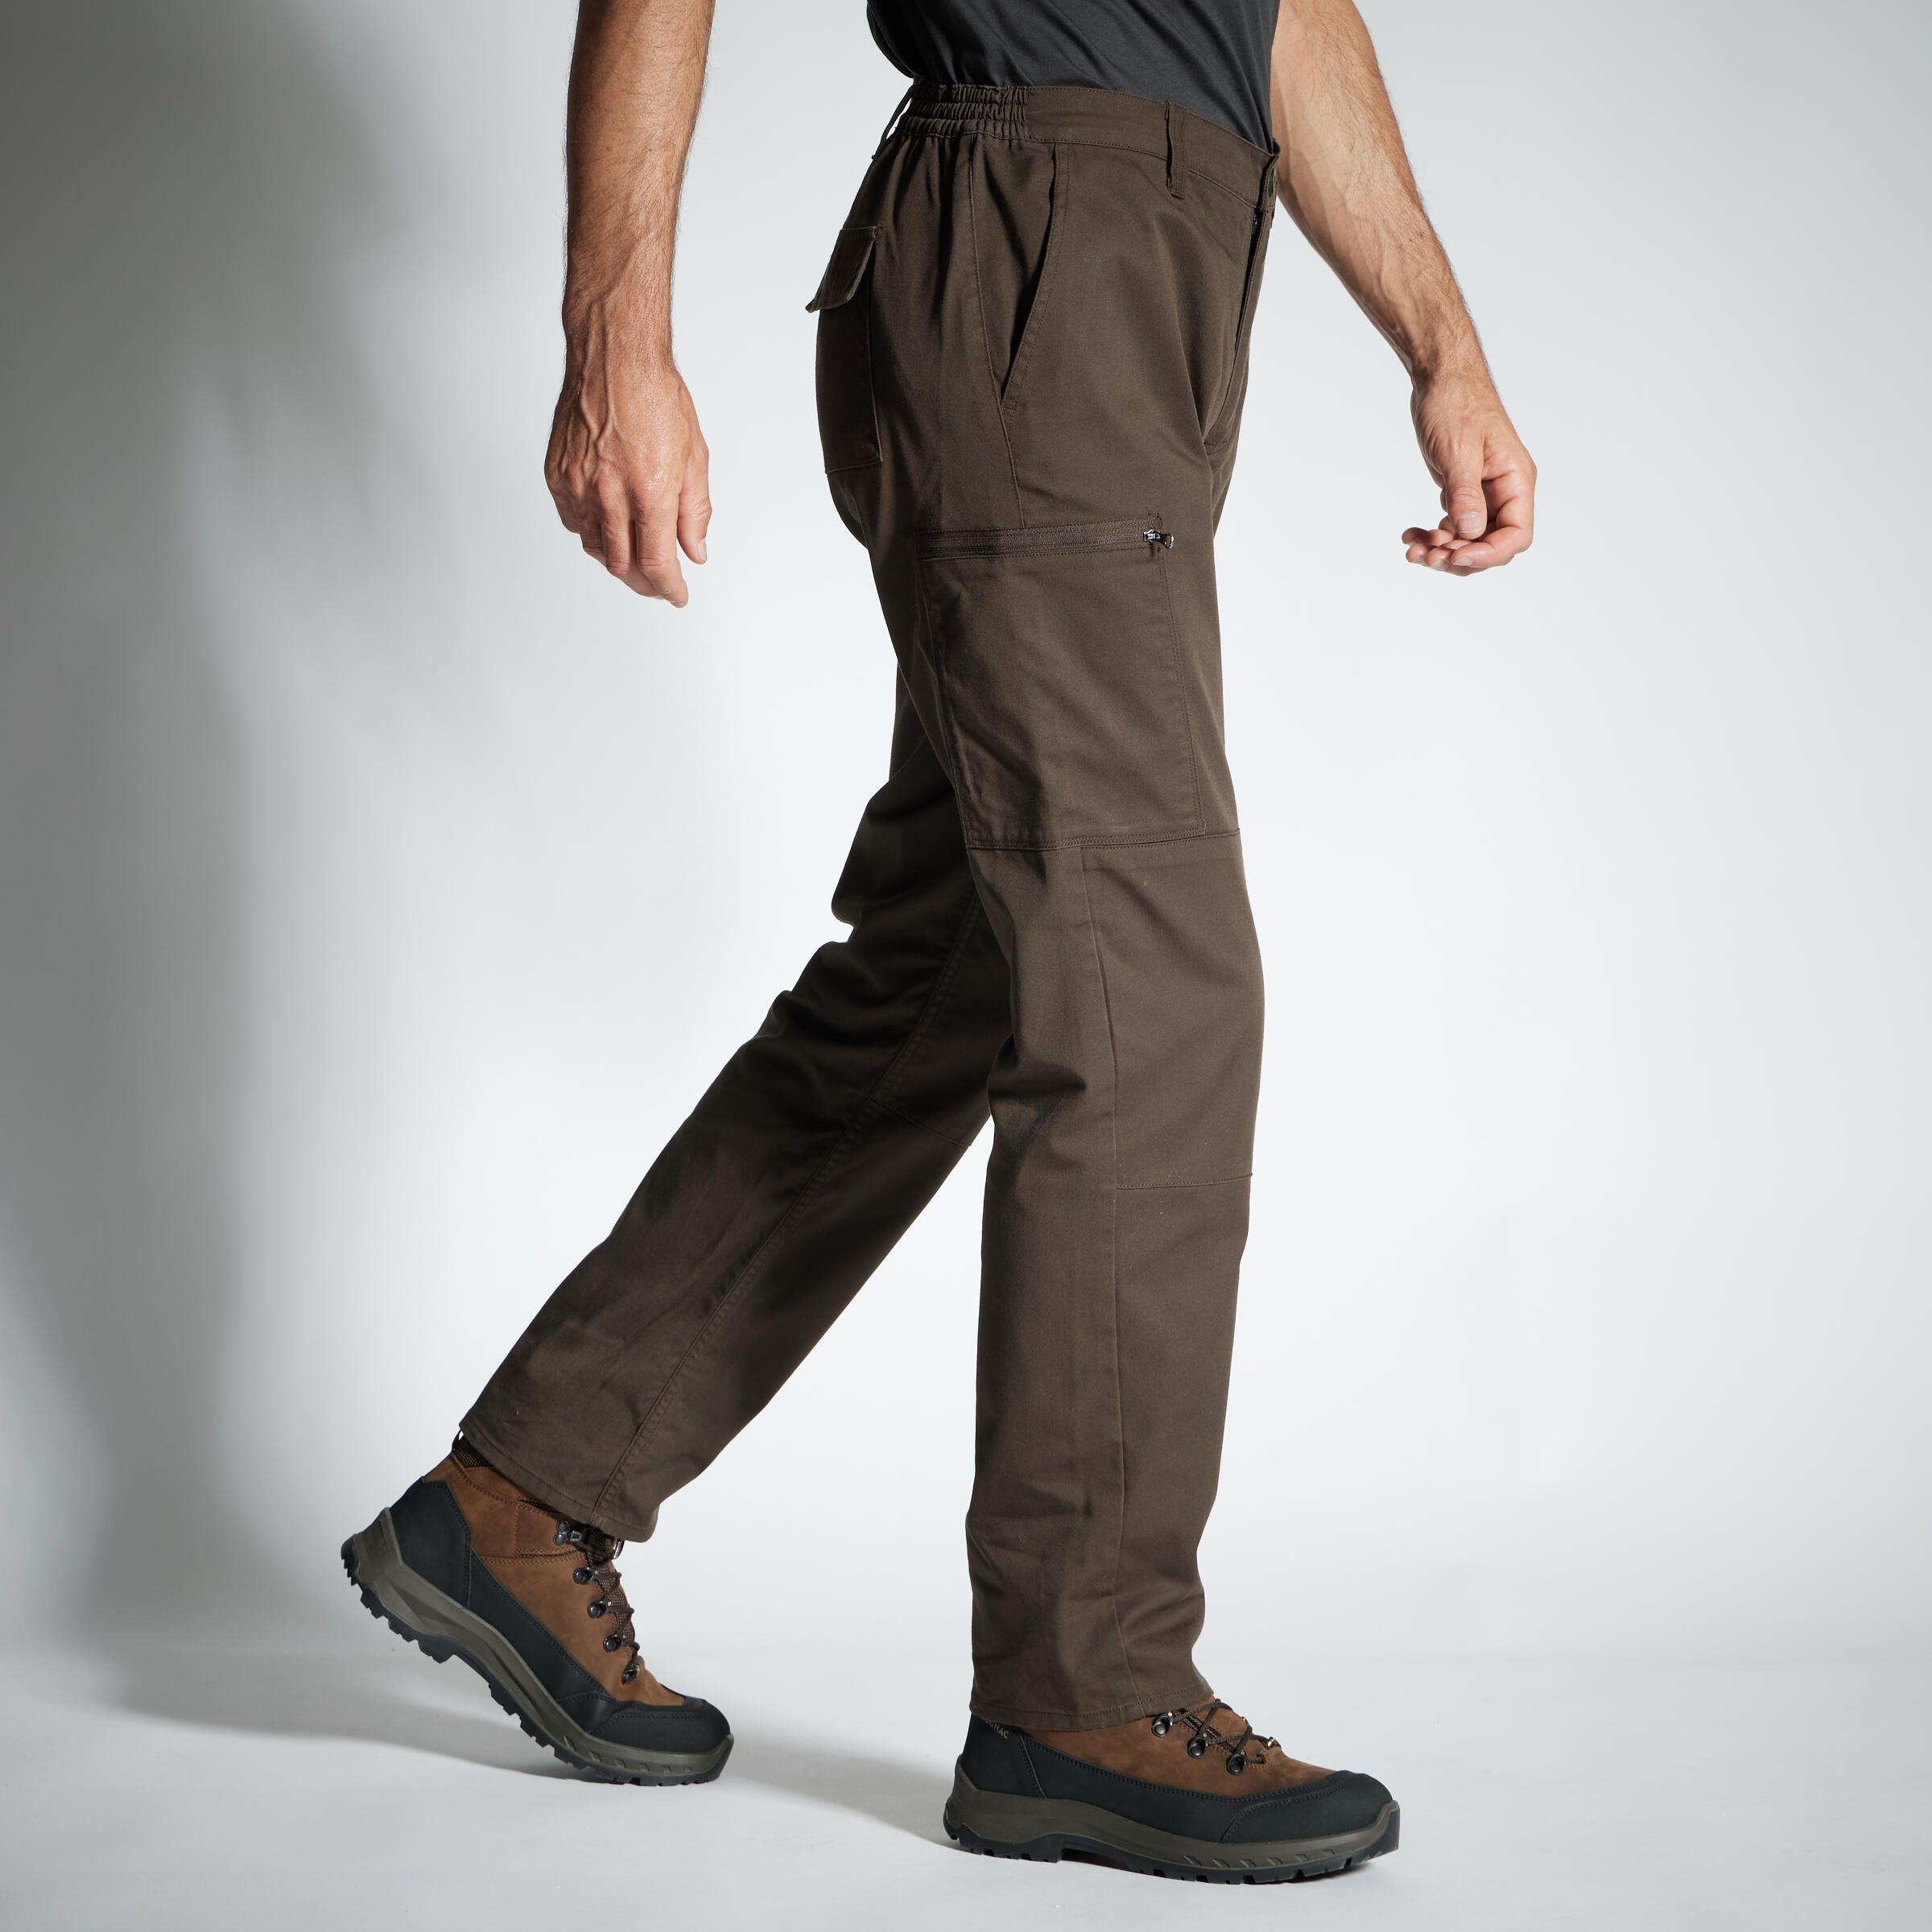 Can a guy wear black shoes with khaki pants? - Quora